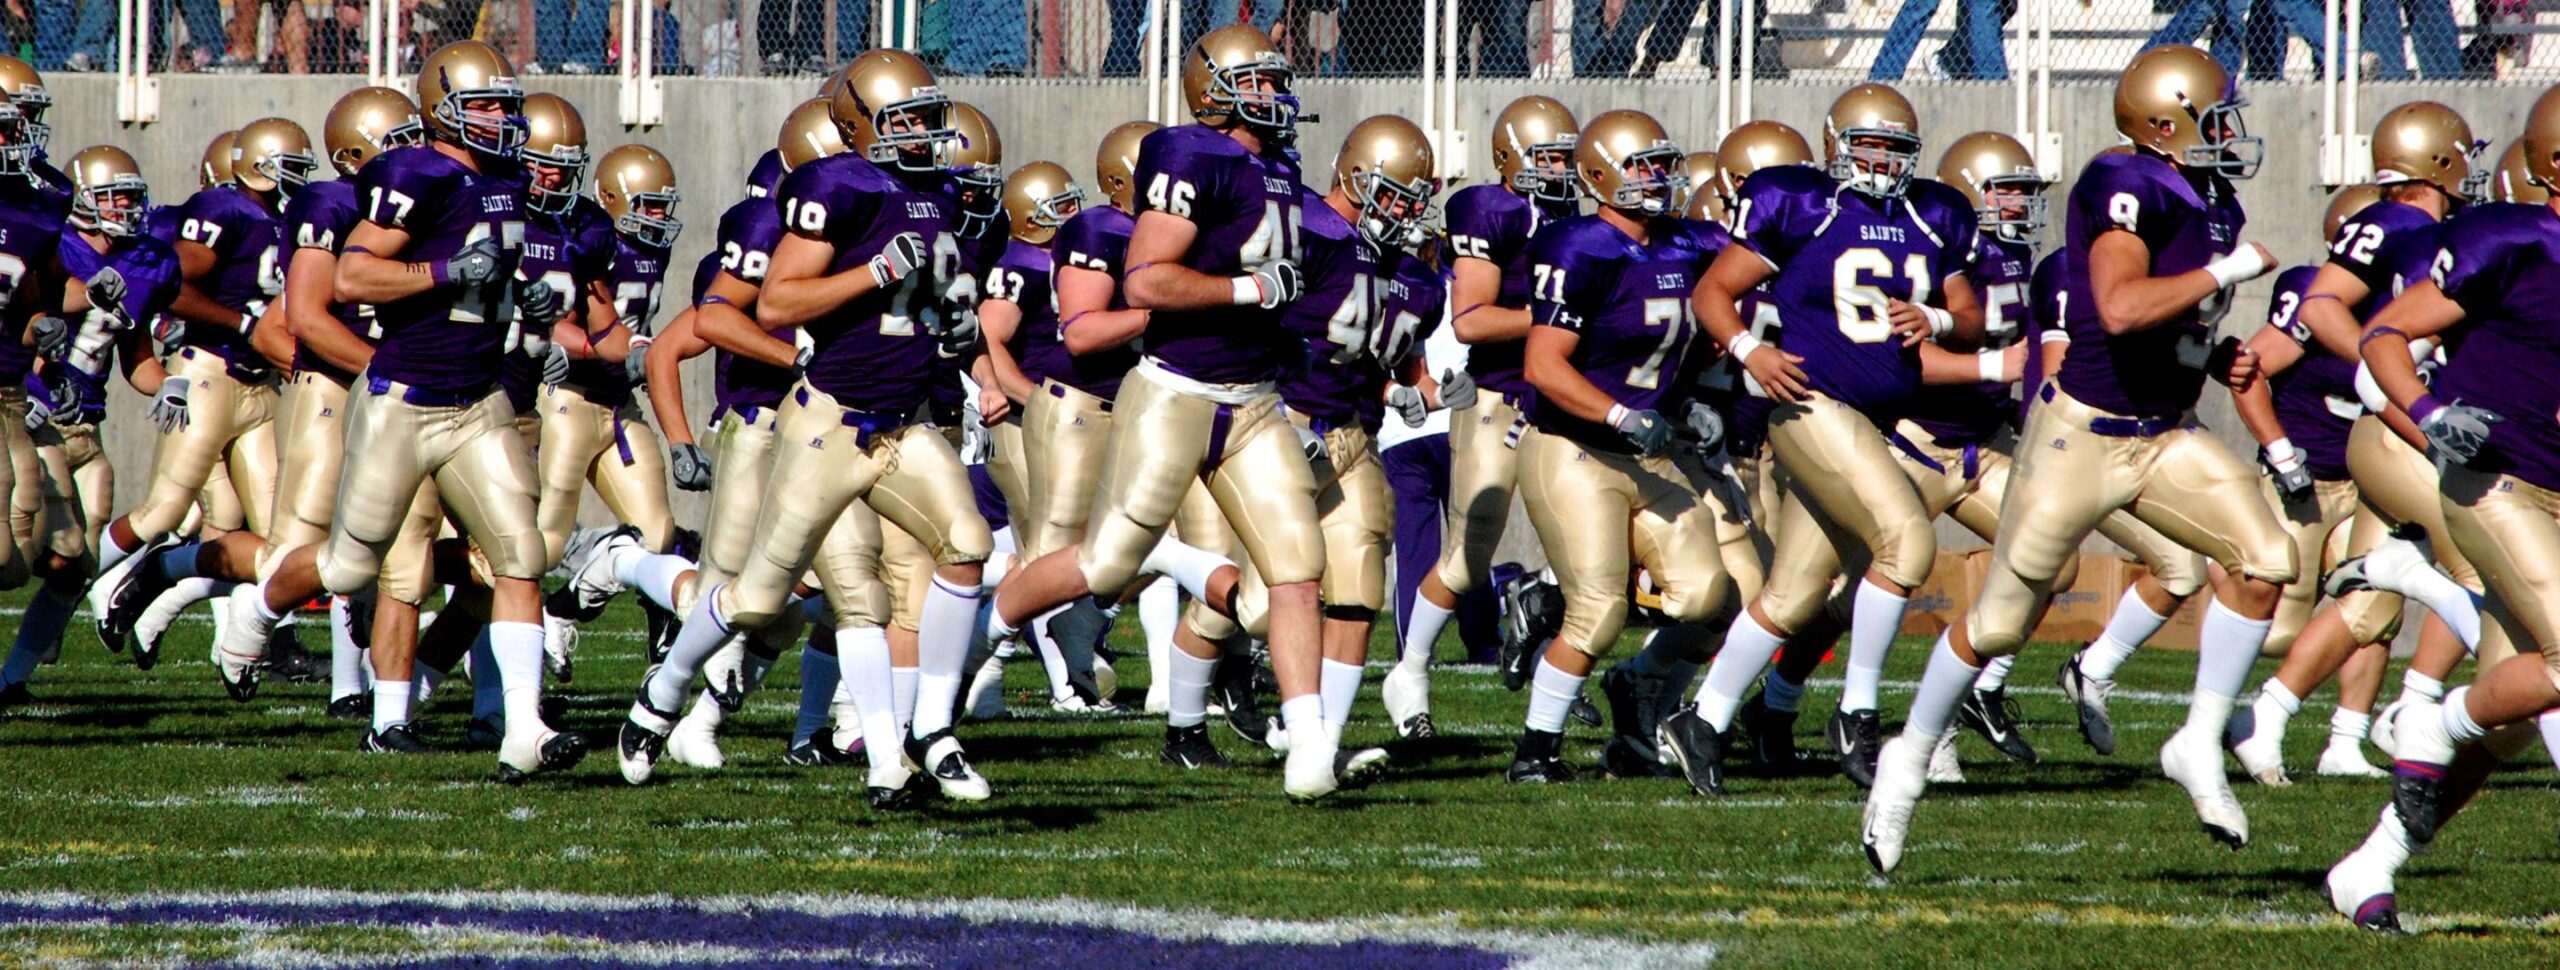 Carroll College Fighting Saints enter the field for their game against MSU - Northern on October 25, 2008.